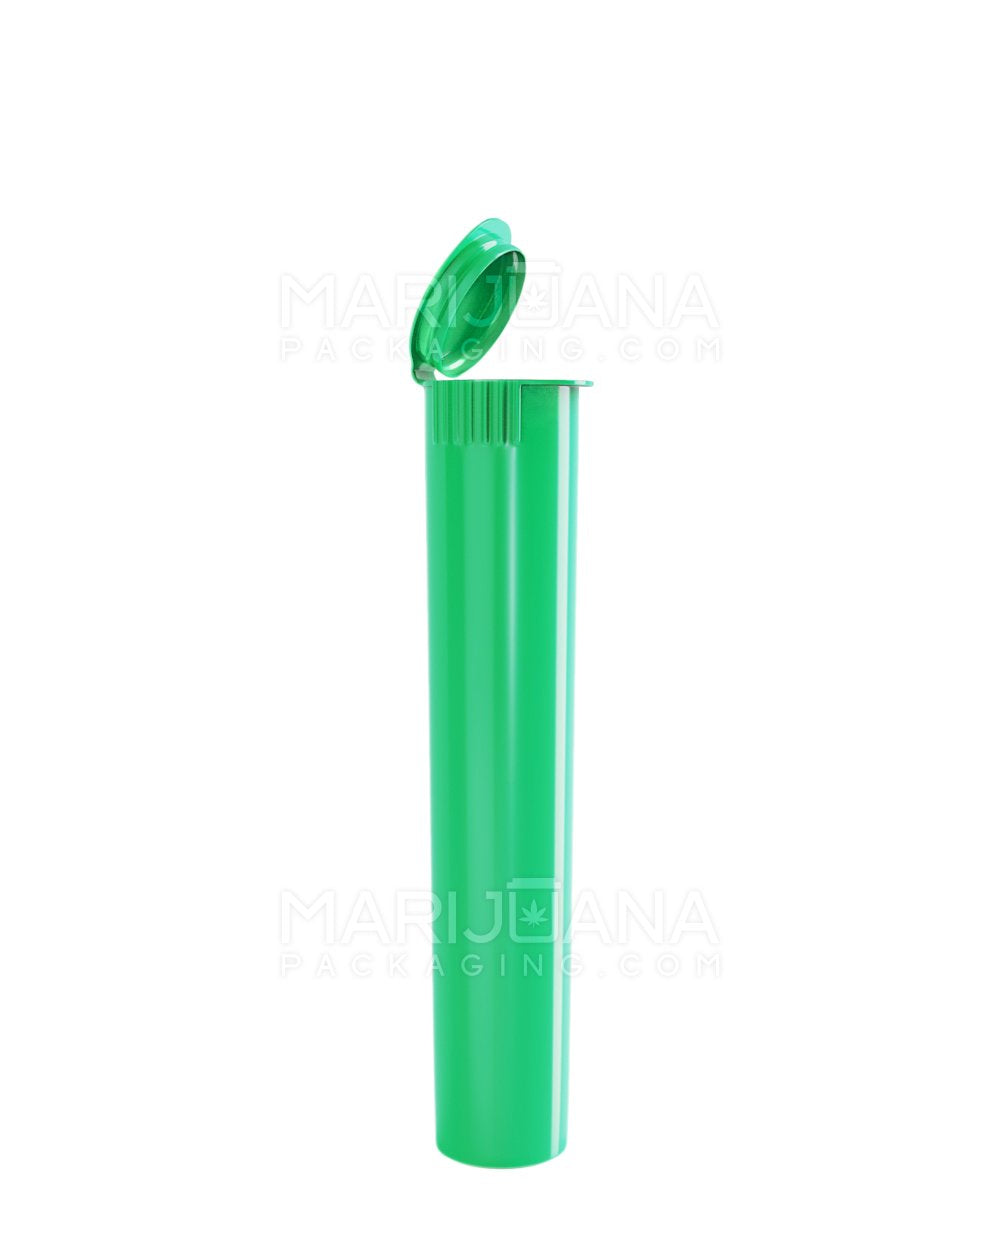 Child Resistant Pop Top Opaque Plastic Pre-Roll Tubes | 95mm - Green | Sample - 1